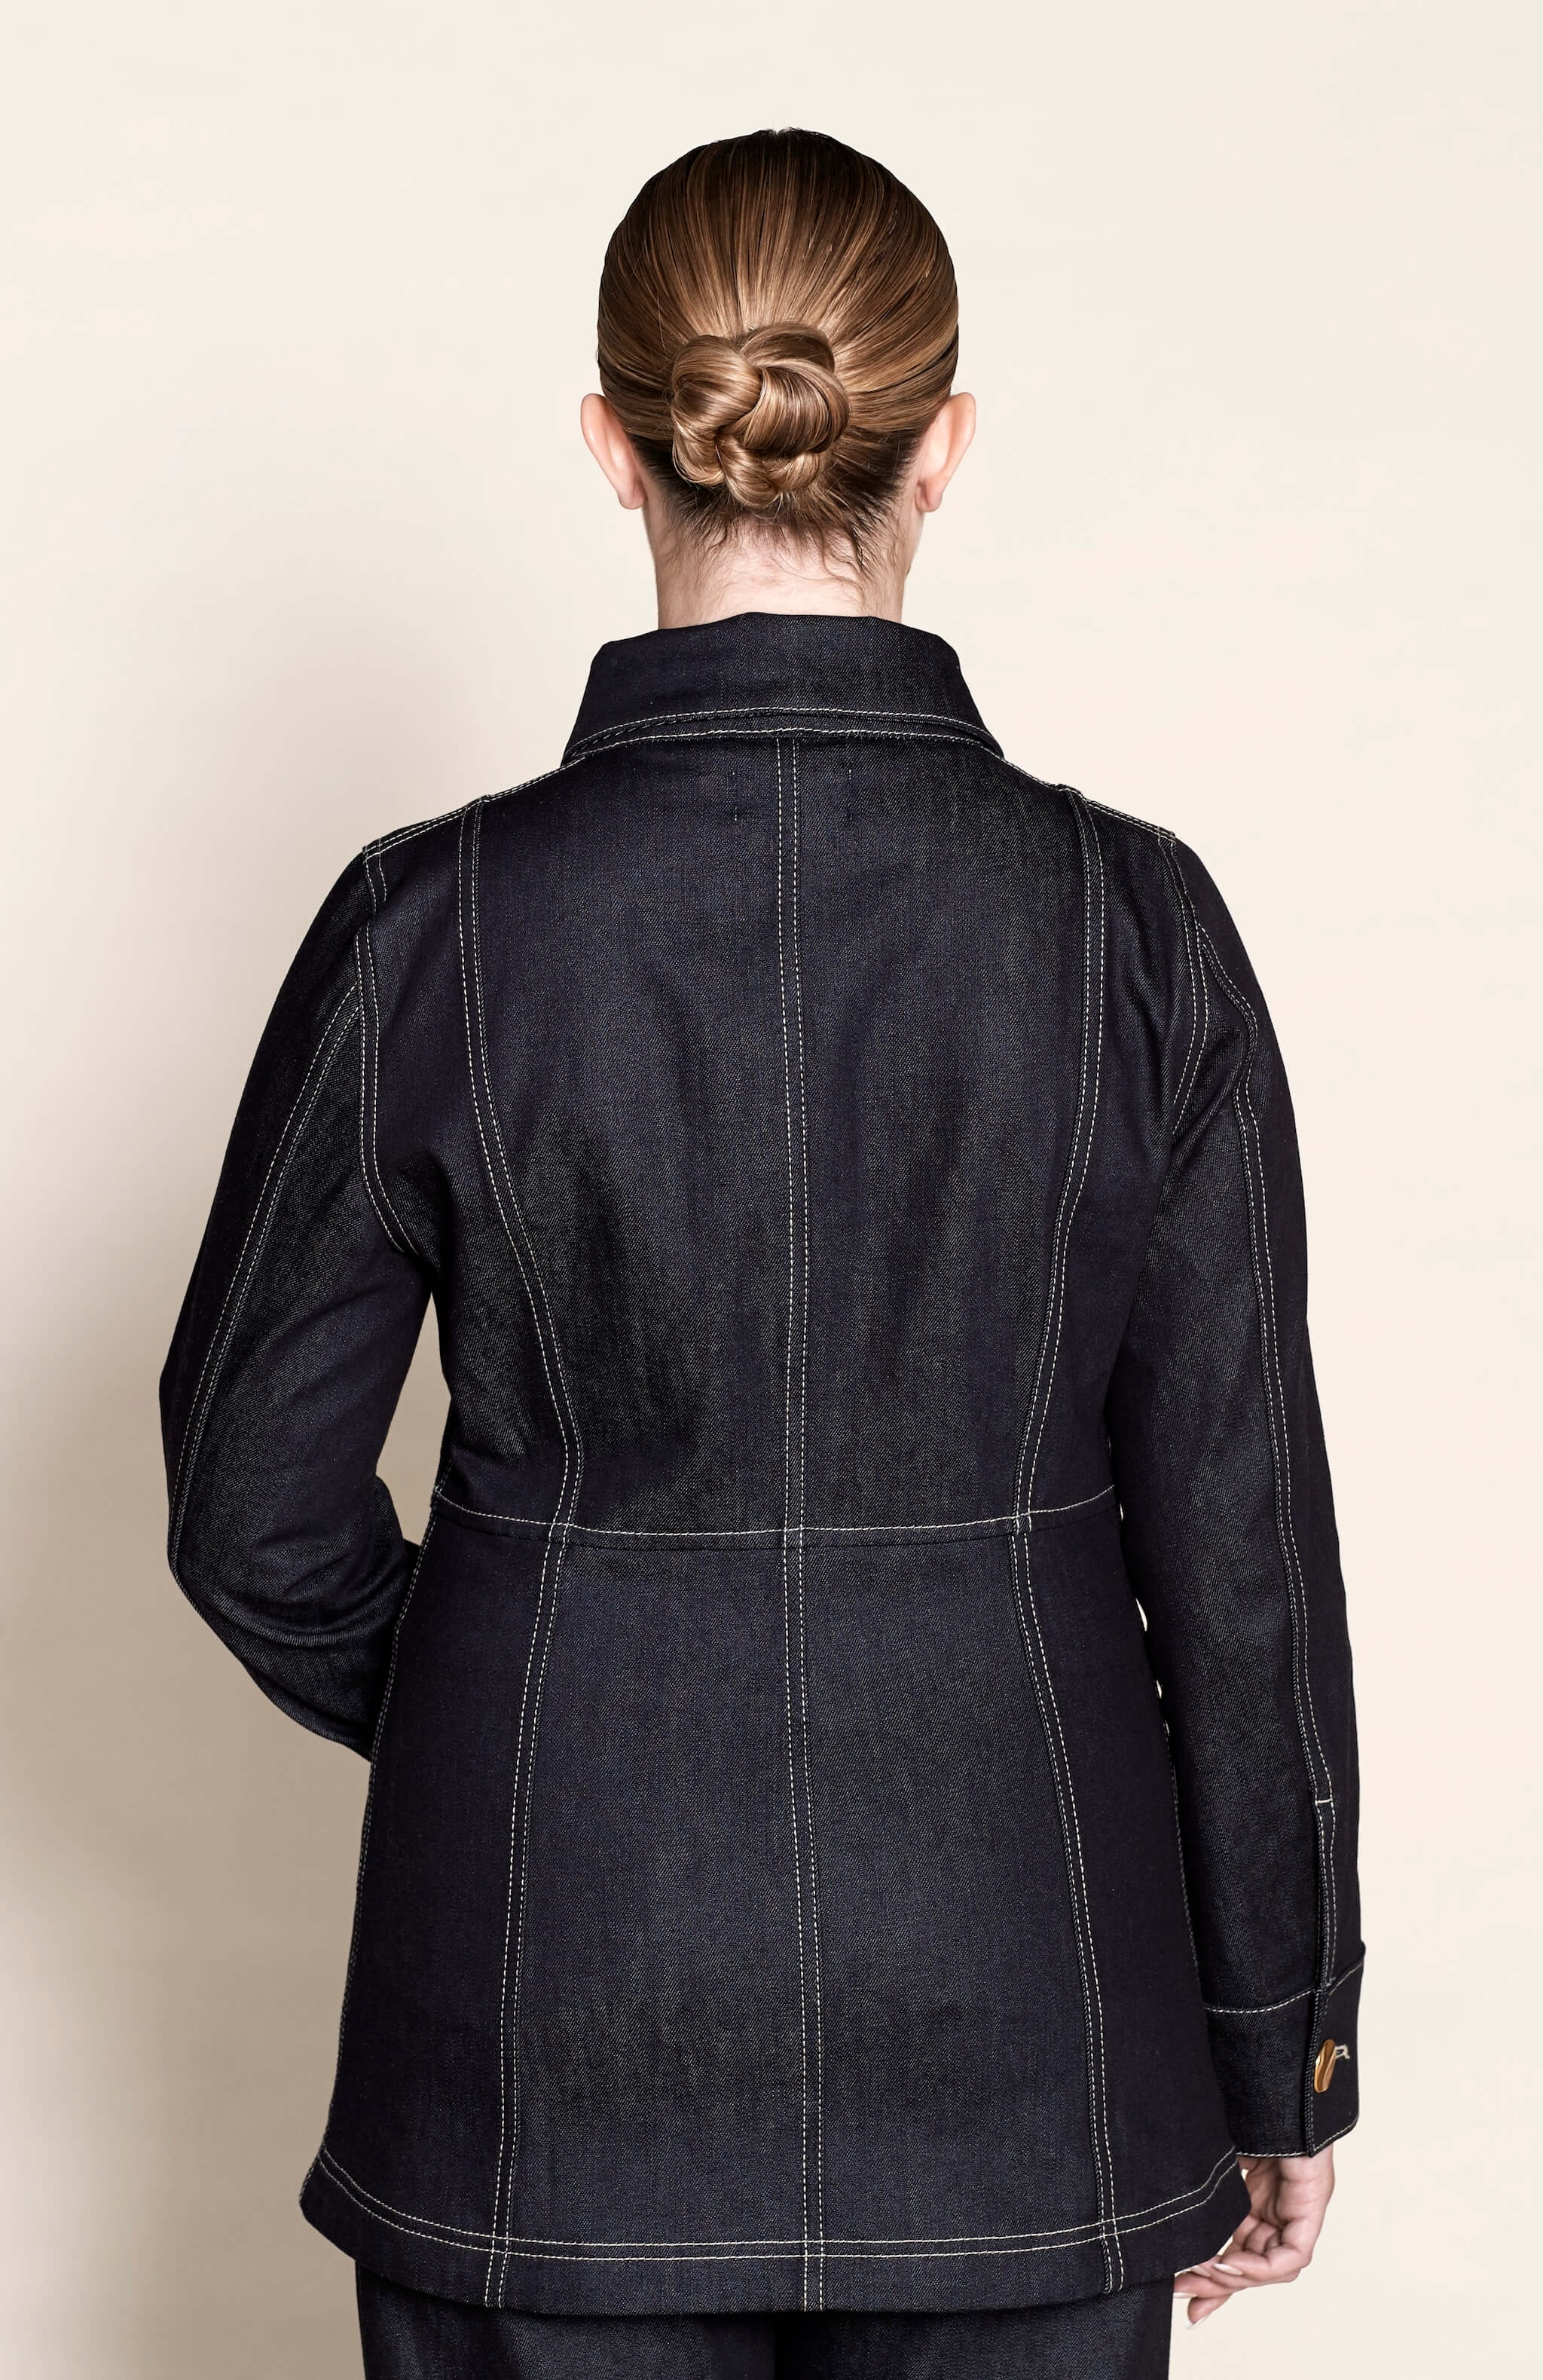 Back view of a tailored Cyme Copenhagen denim jacket, highlighting the fine stitching and structured fit that embody the brand’s Scandinavian design and sustainable fashion ethos.